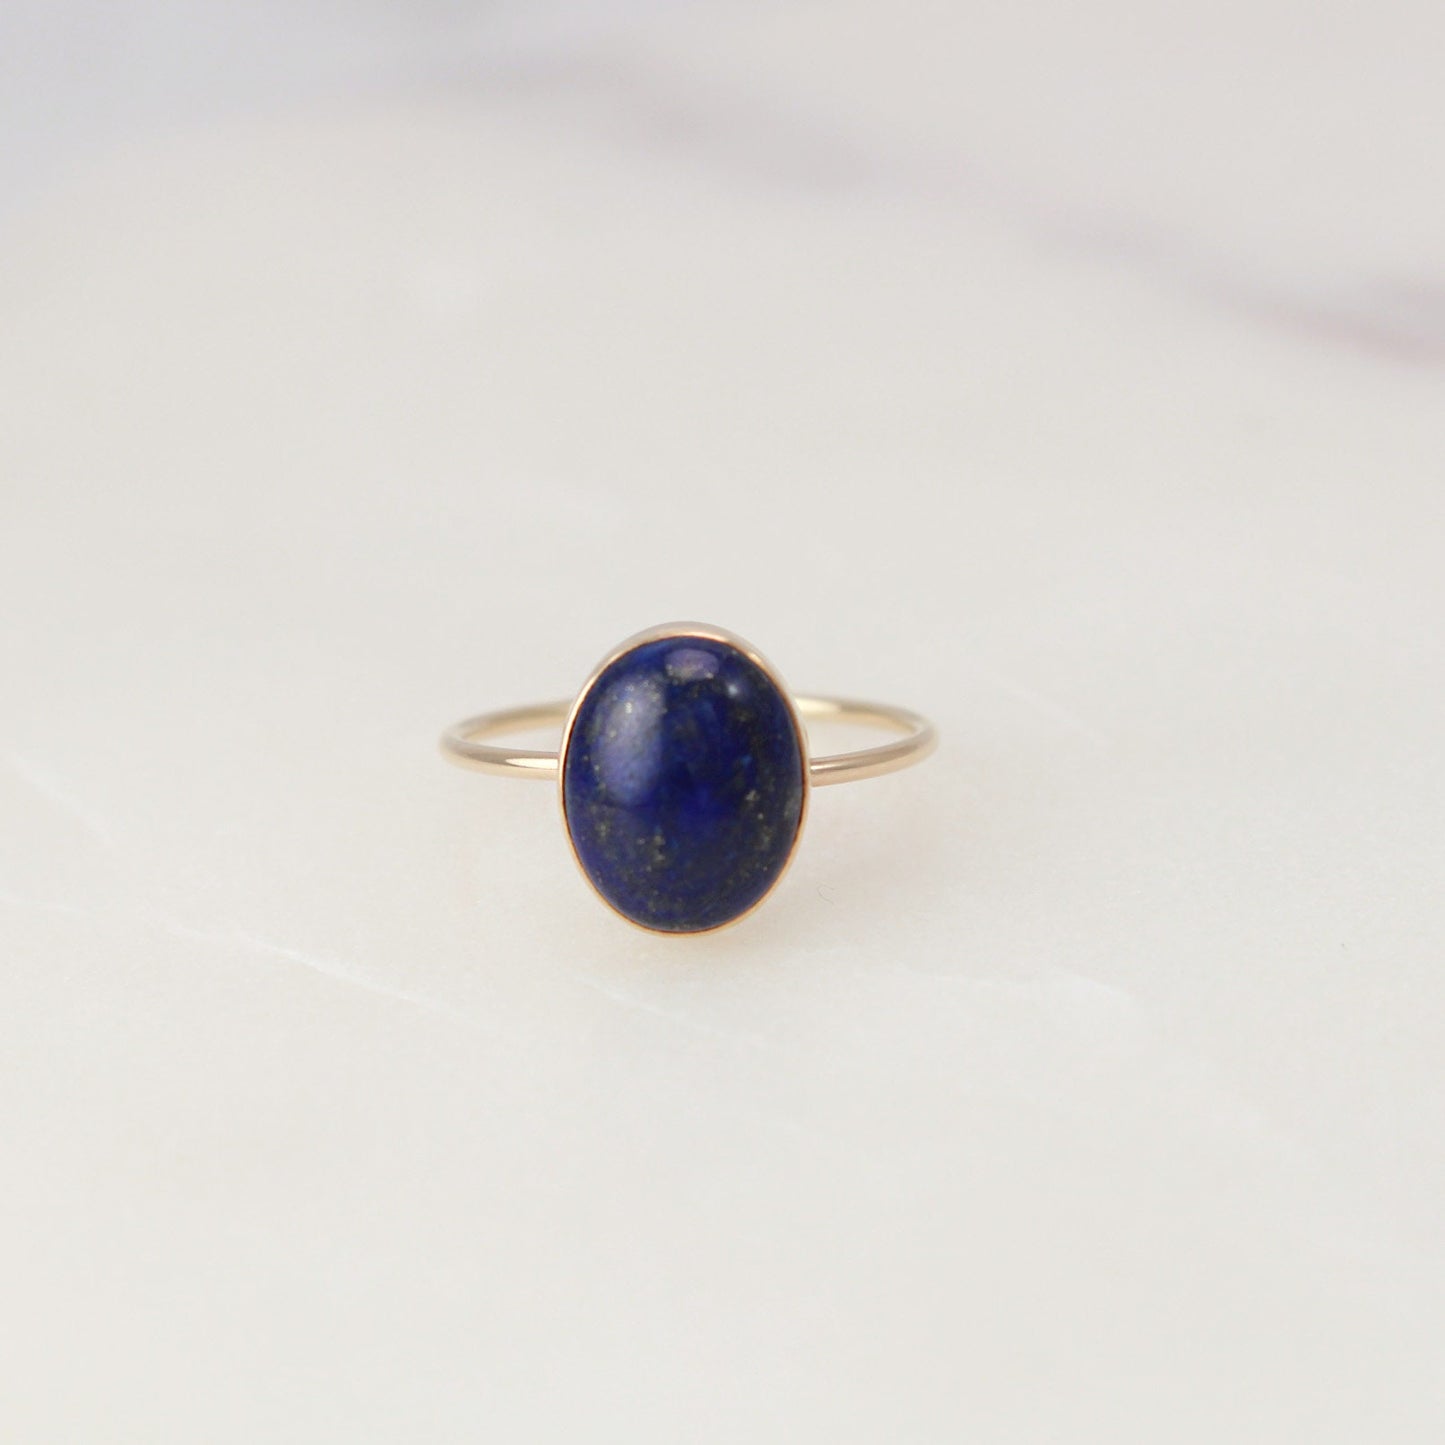 Oval Lapis Ring - 14K Gold Filled, 8x10mm Oval Lapis Lazuli, 1mm Gold Filled Ring